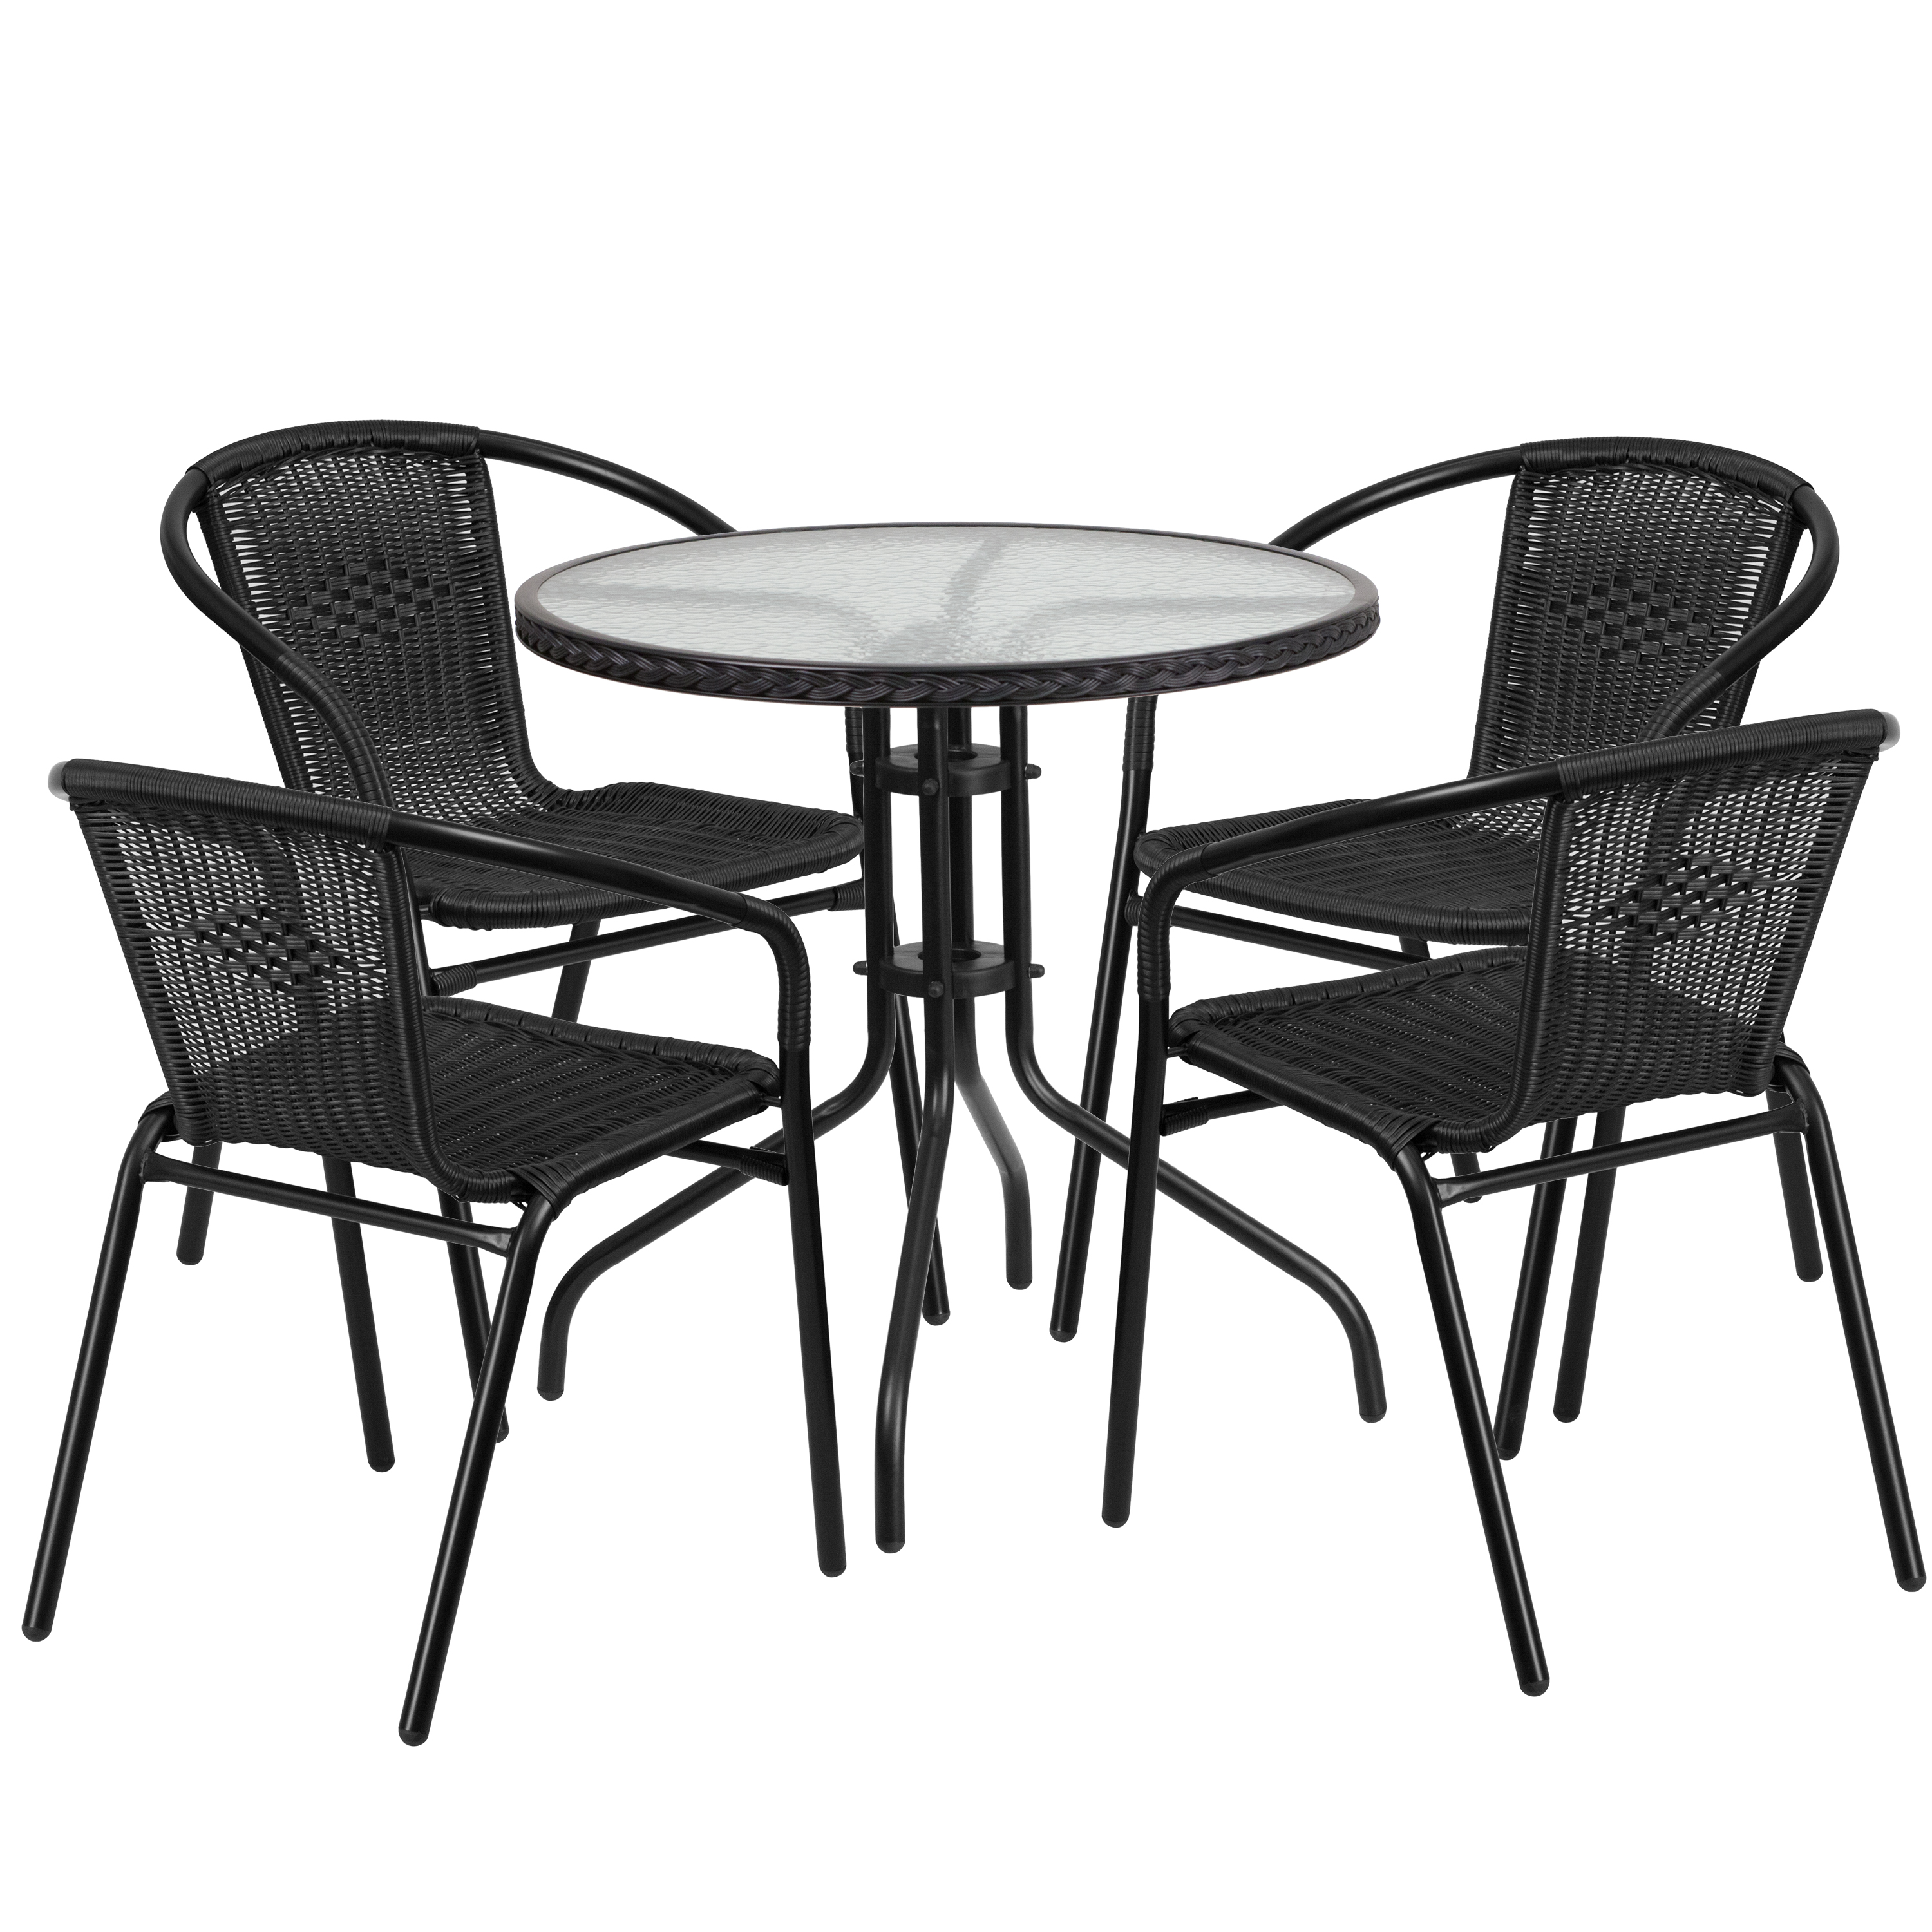 Flash Furniture TLH-087RD-037BK4-GG 28'' Round Glass Top Patio Table with Black Rattan Edging and 4 Stack Chairs, 5 Piece Set